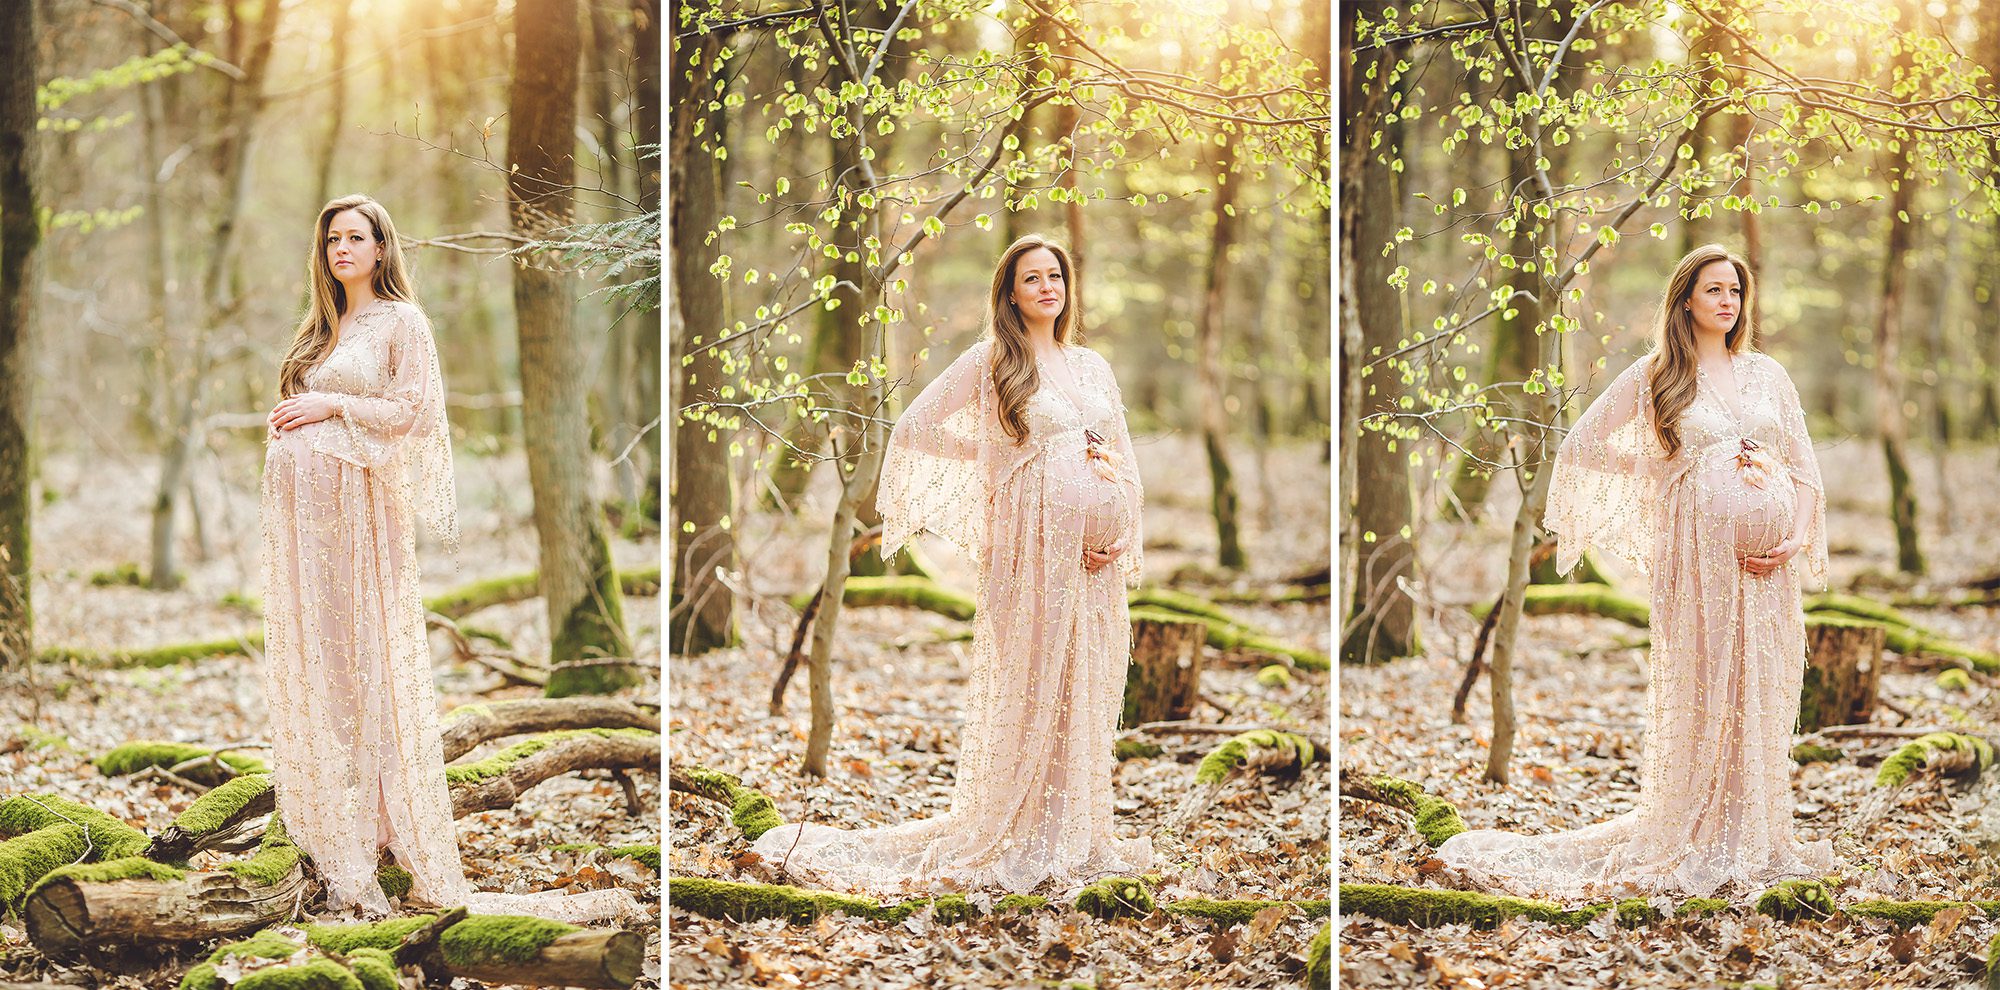 Ramstein maternity photographer captures a magical spring forest session near Frankfurt